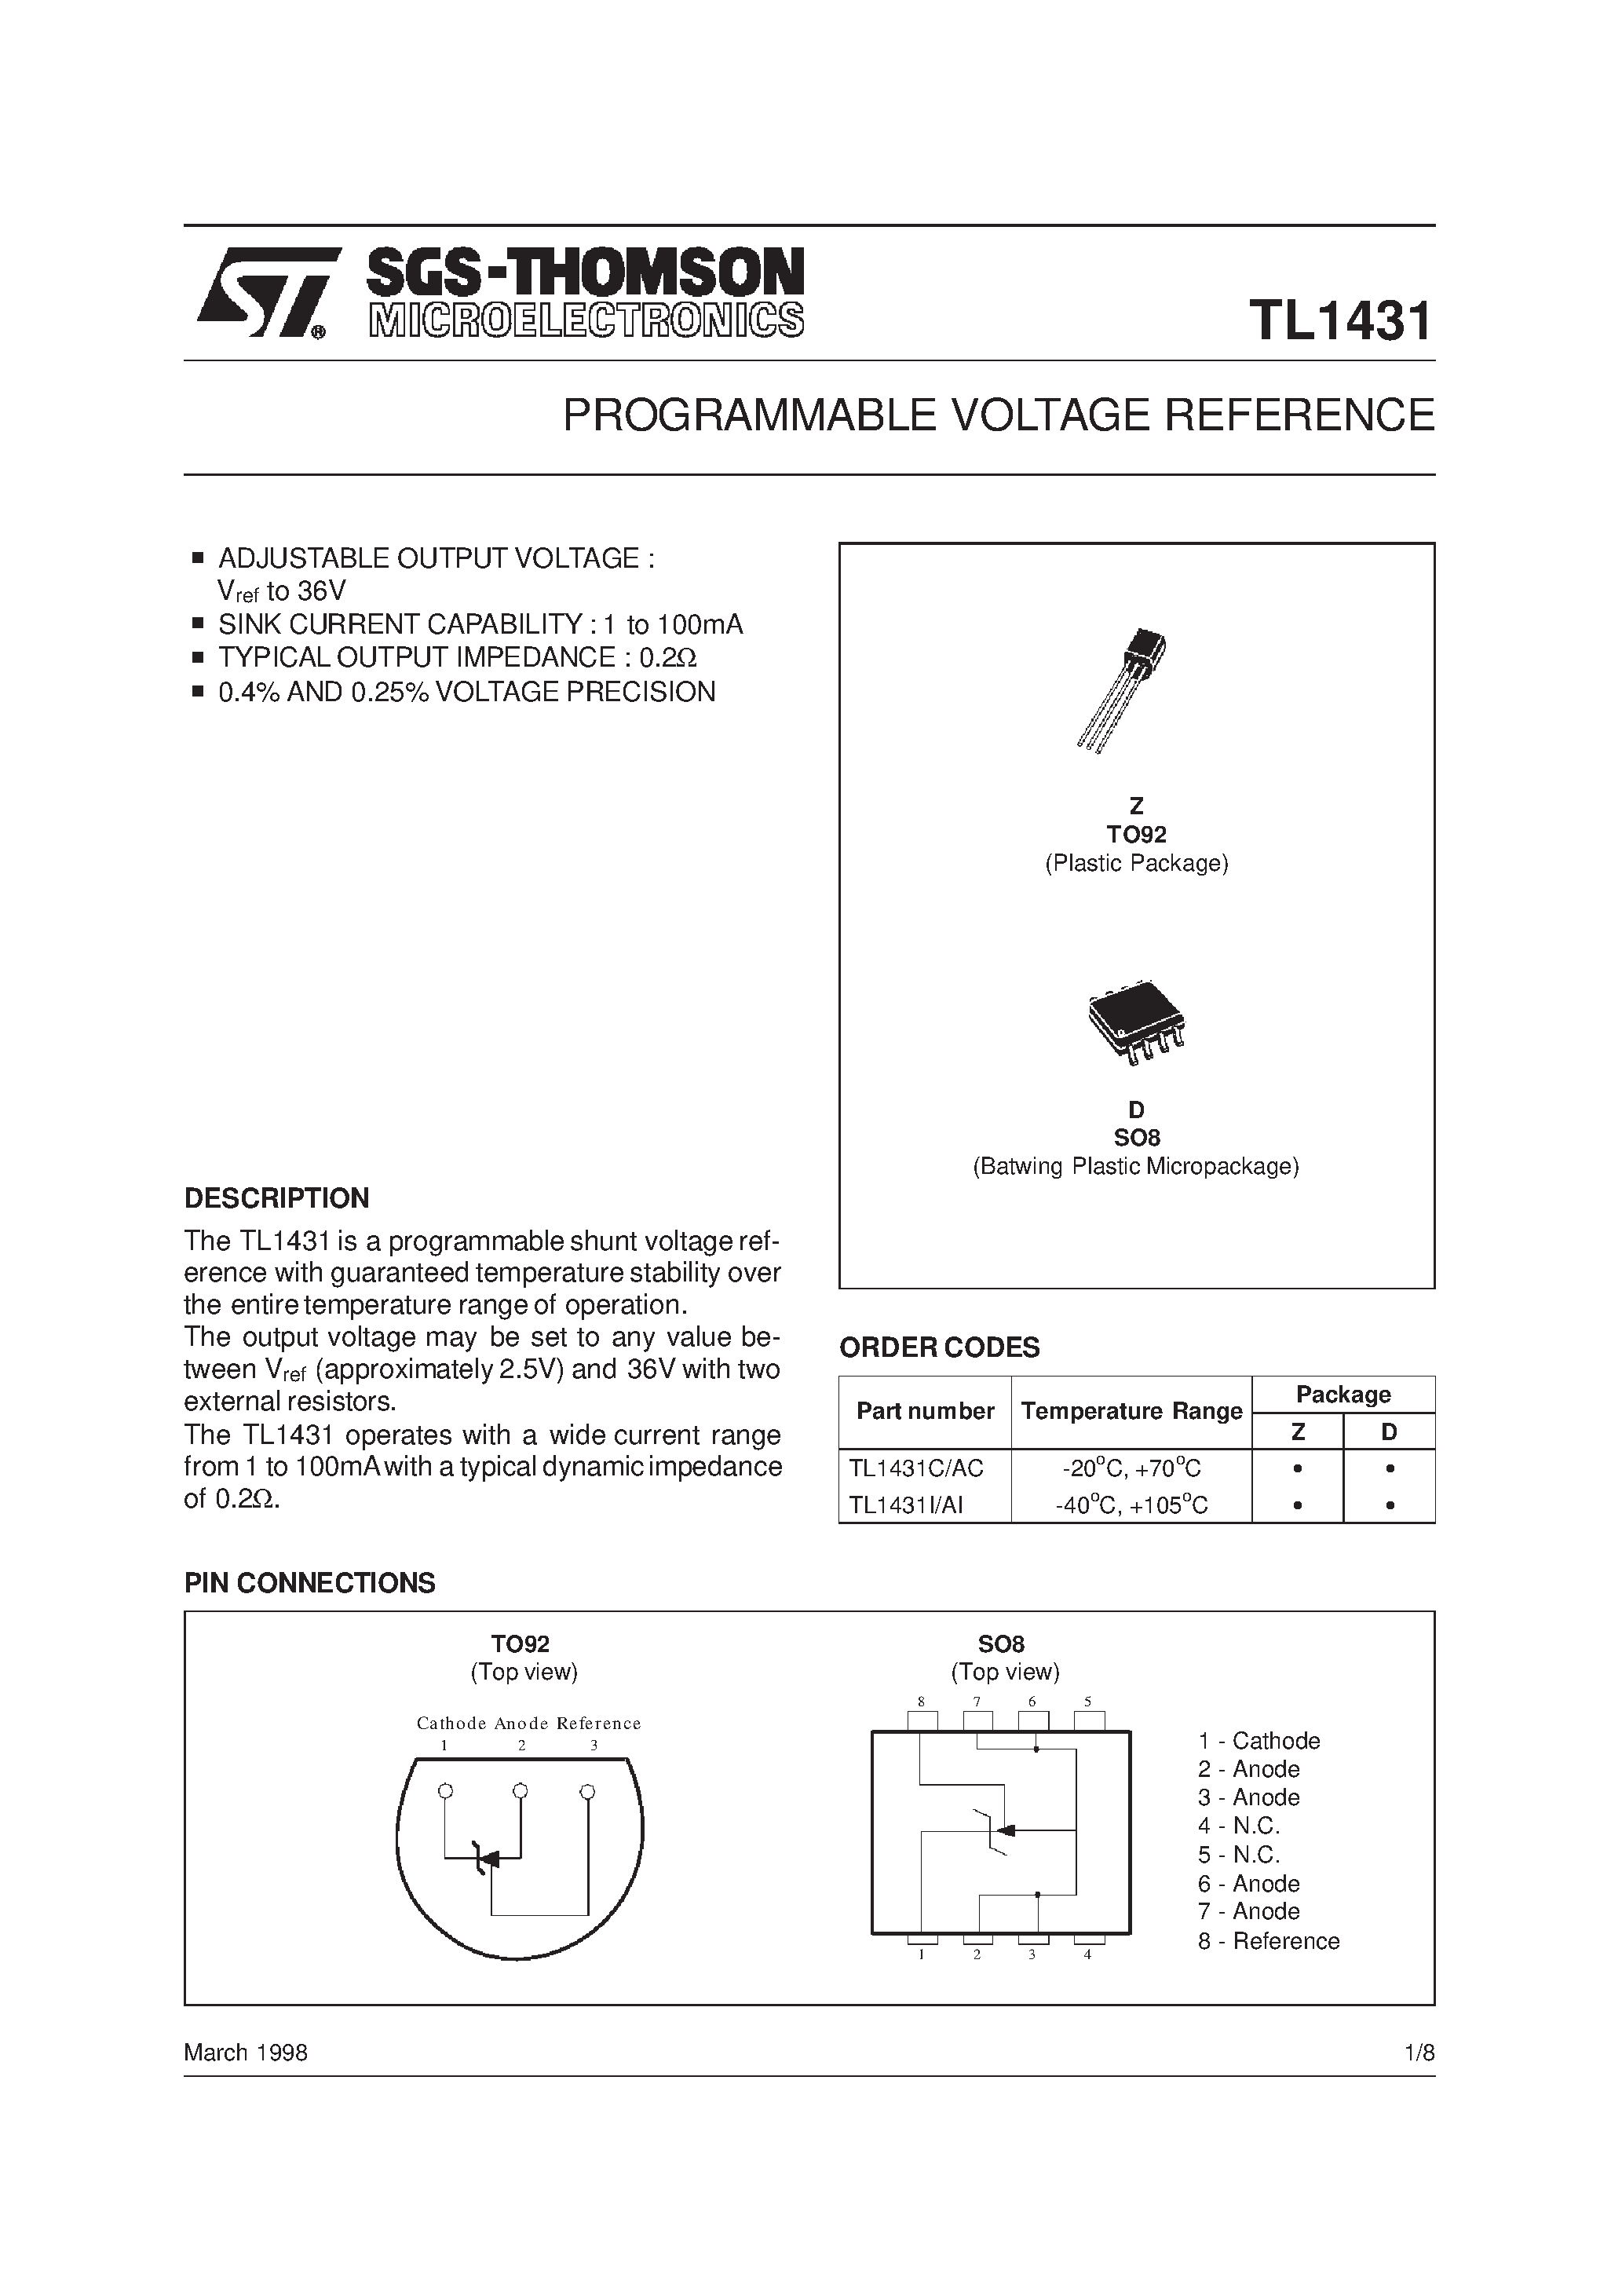 Даташит TL1431ID - PROGRAMMABLE VOLTAGE REFERENCE страница 1